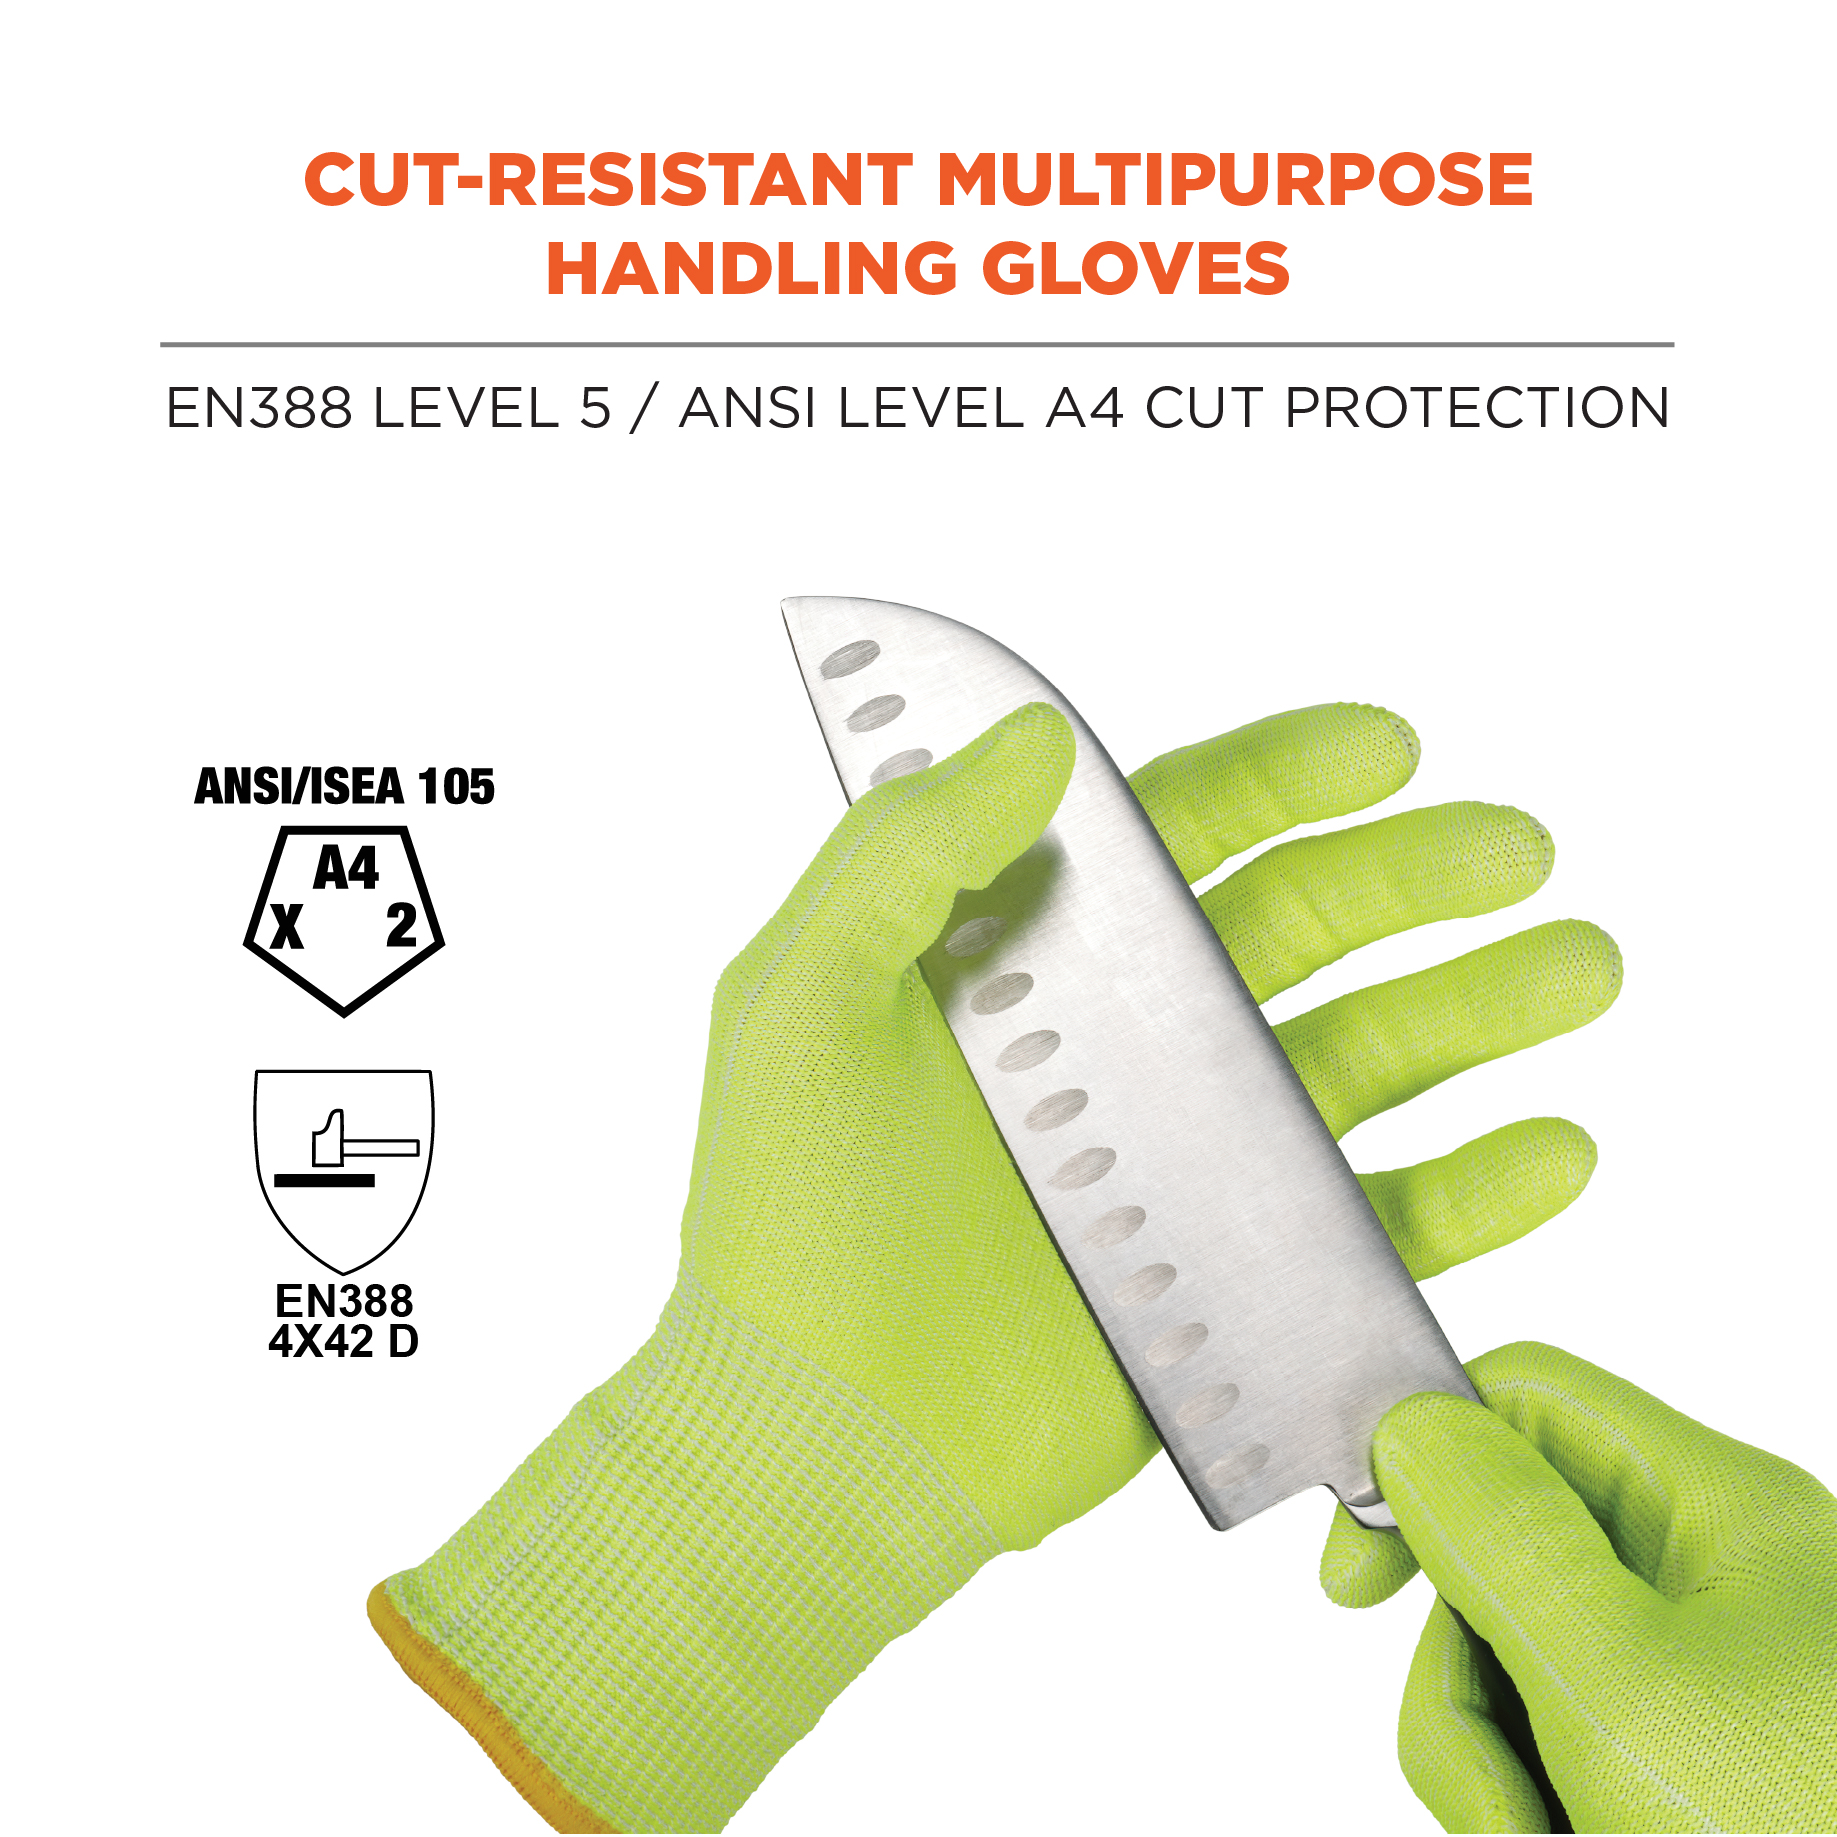 Find your favorite product knife cutting gloves